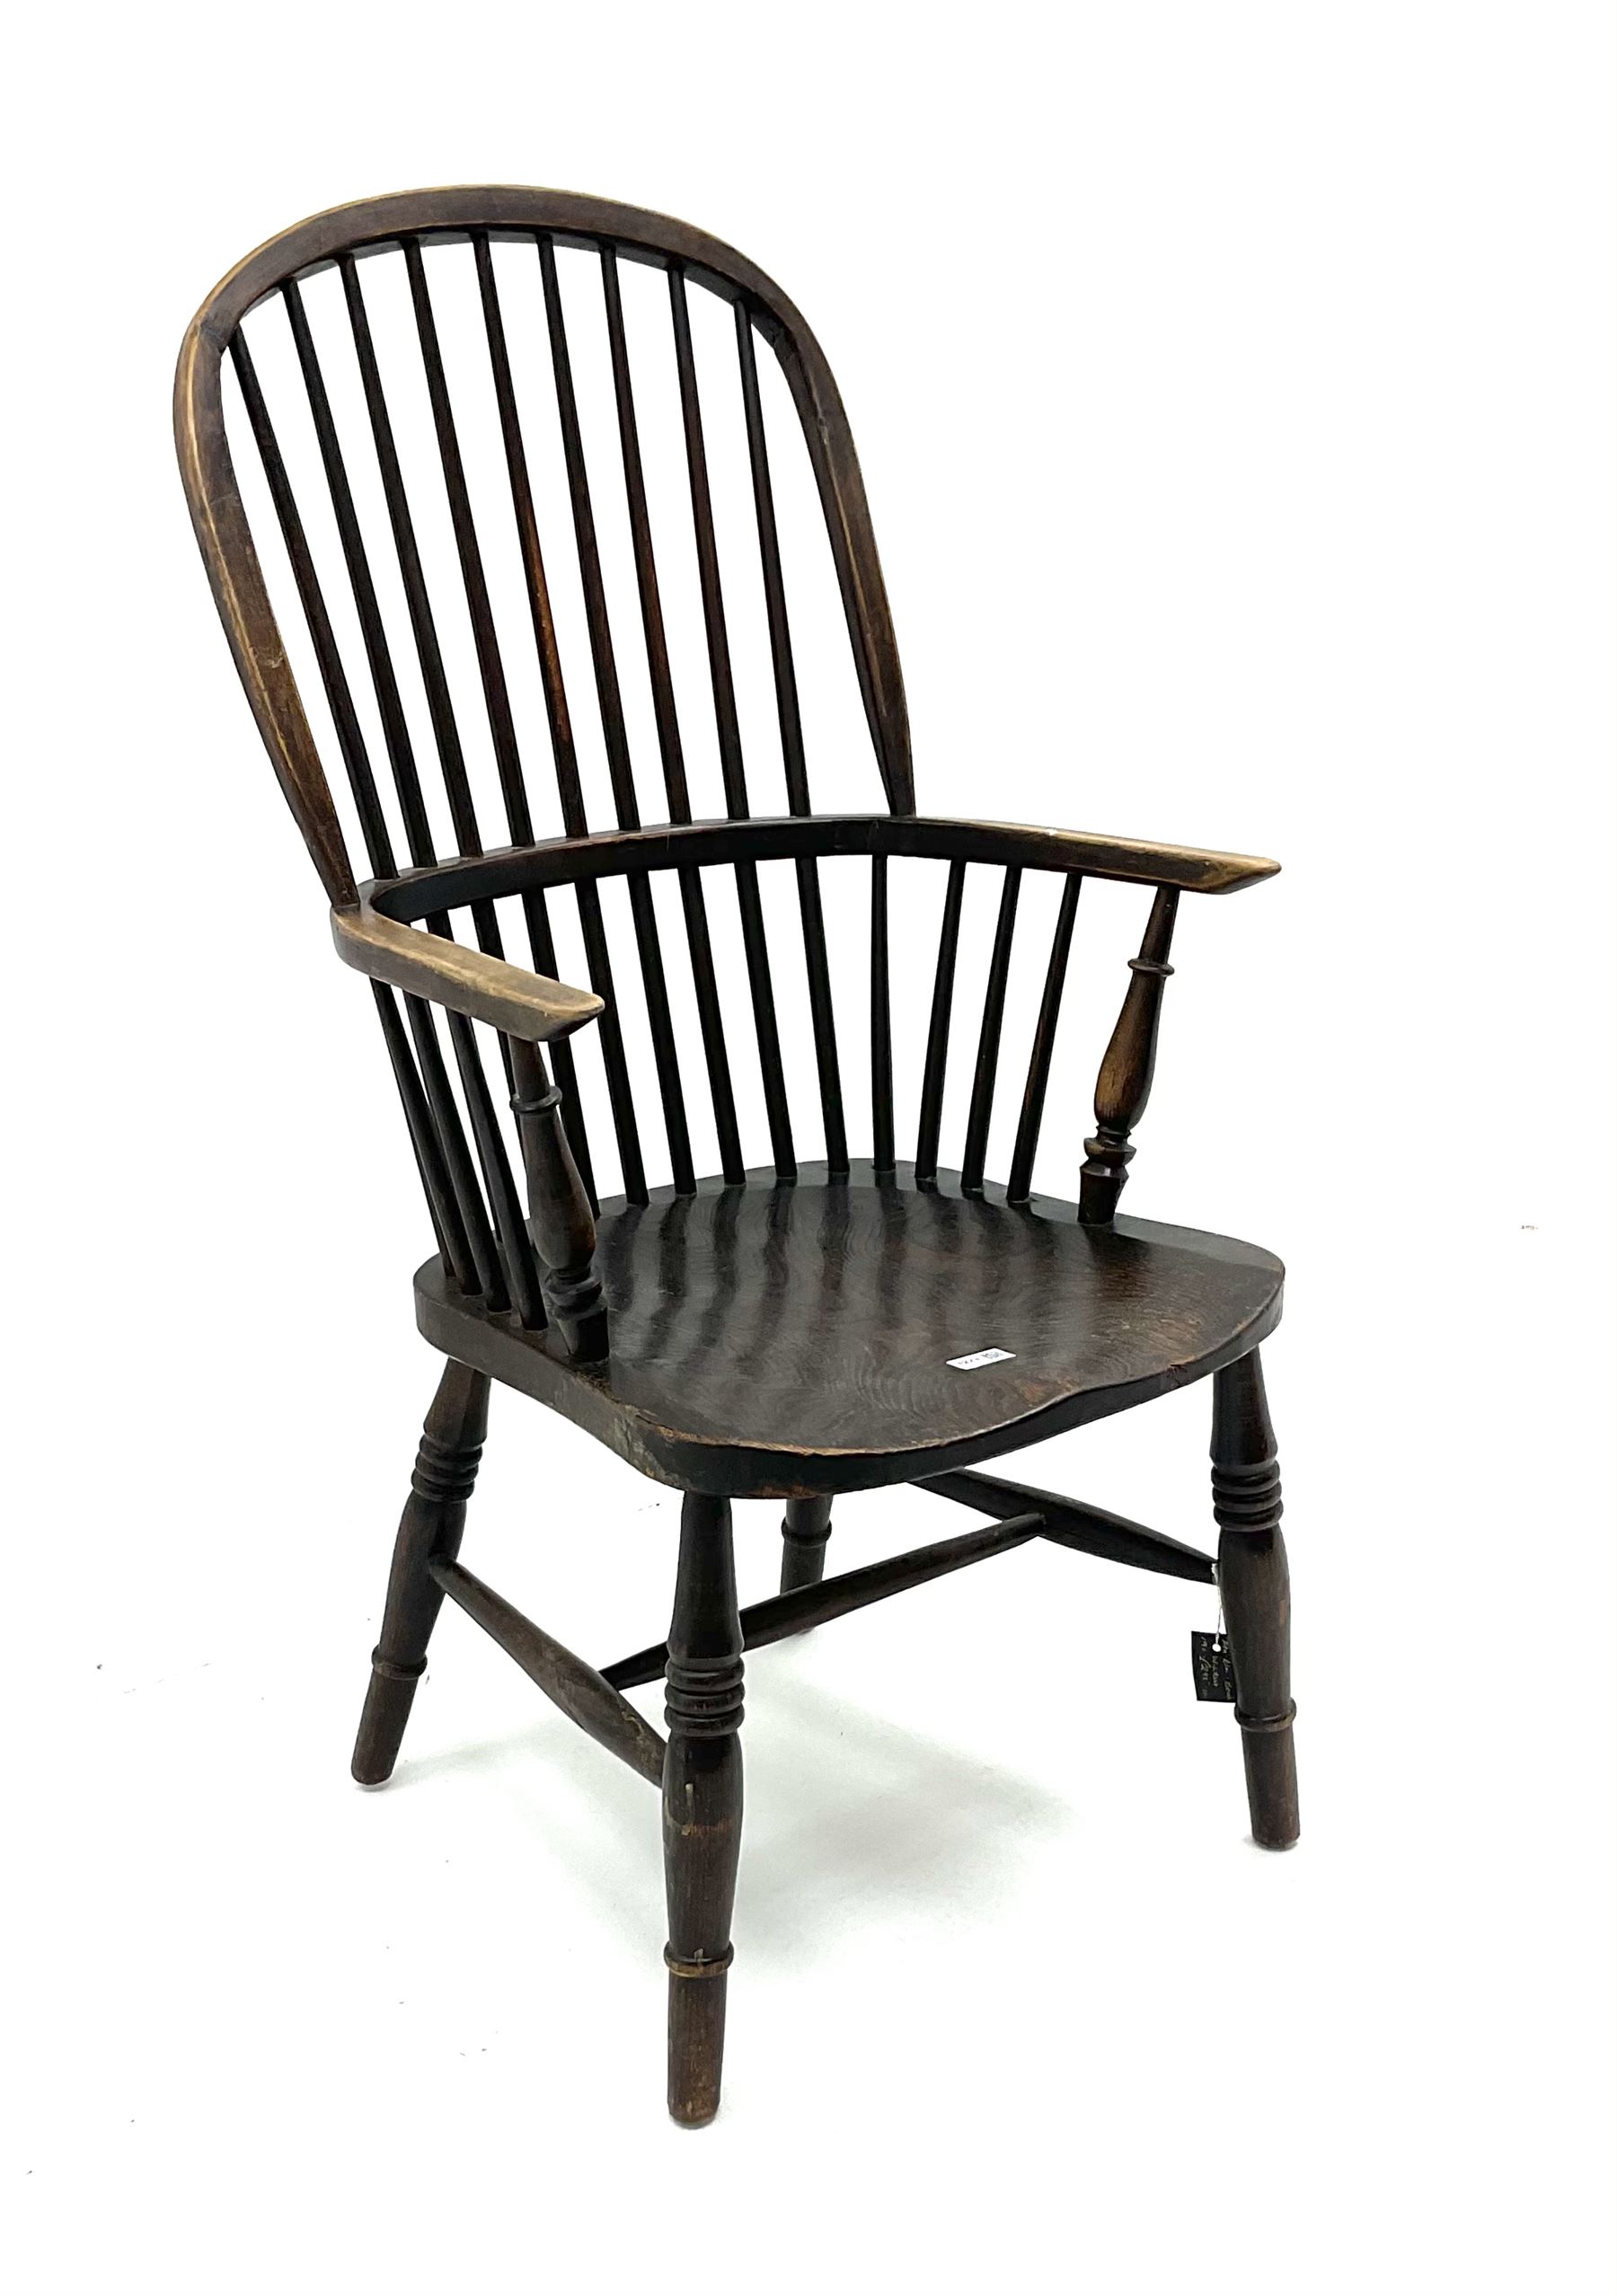 Early 19th century Windsor armchair - Image 2 of 3